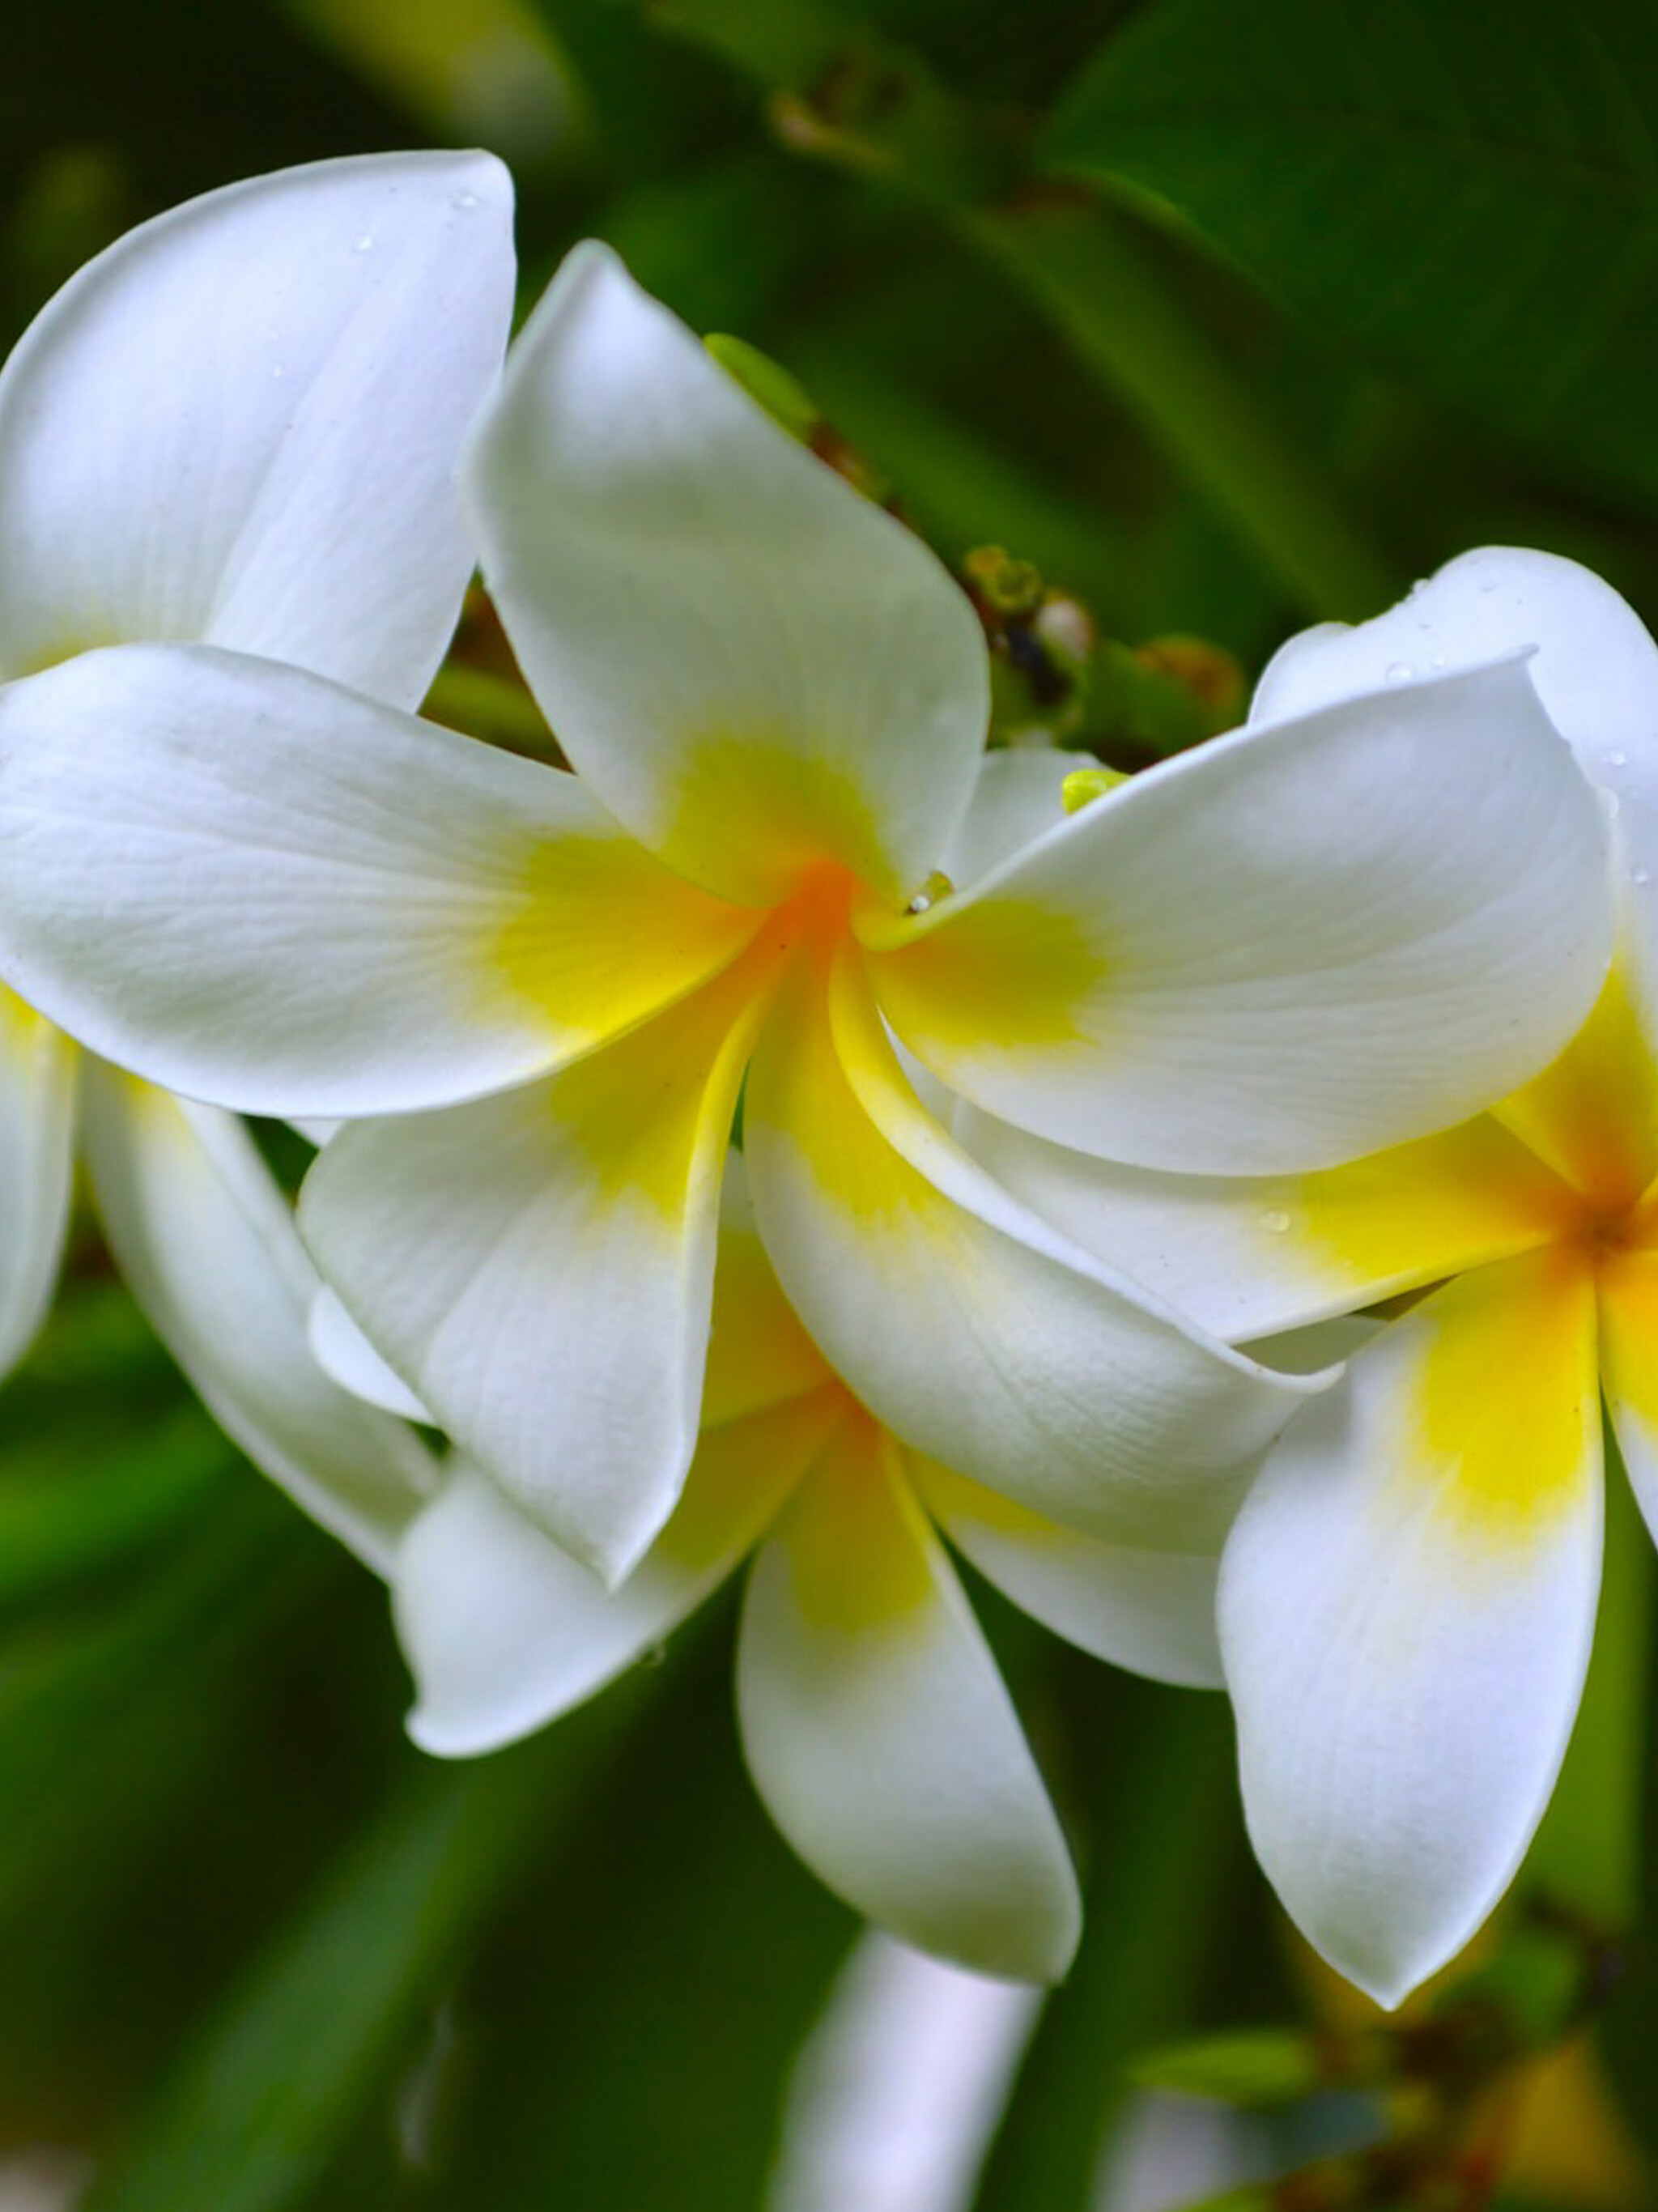 Frangipani Flower: Their scent is strongest at night, to lure sphinx moths into pollinating them by transferring pollen from flower to flower in their fruitless search for nectar. 2050x2740 HD Background.